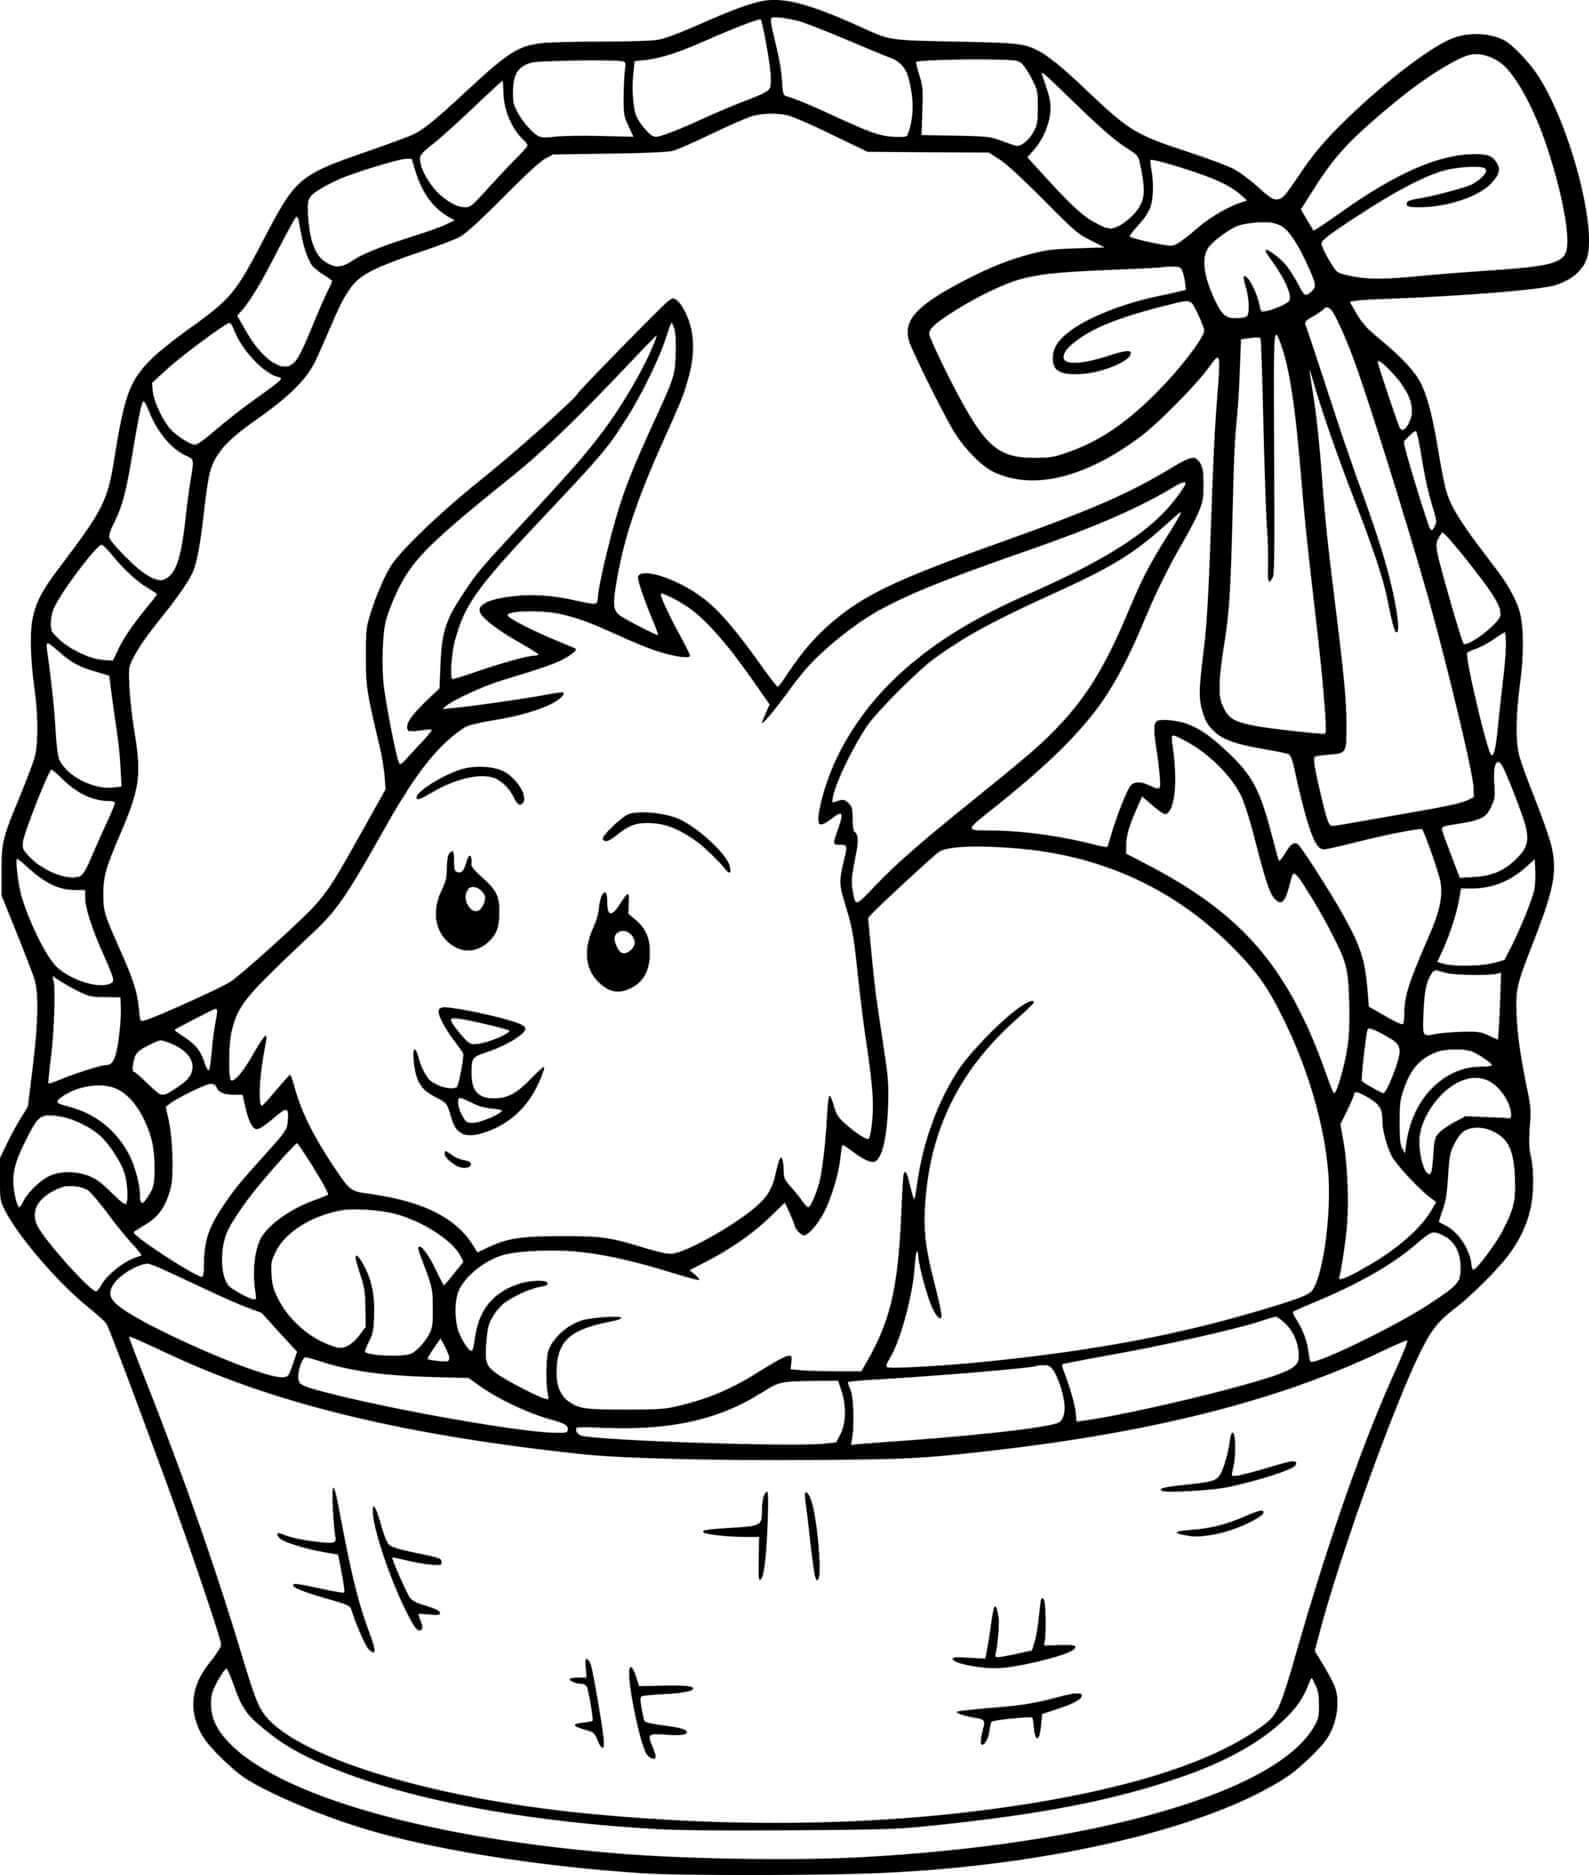 Soft Bunny In The Easter Basket Coloring Page